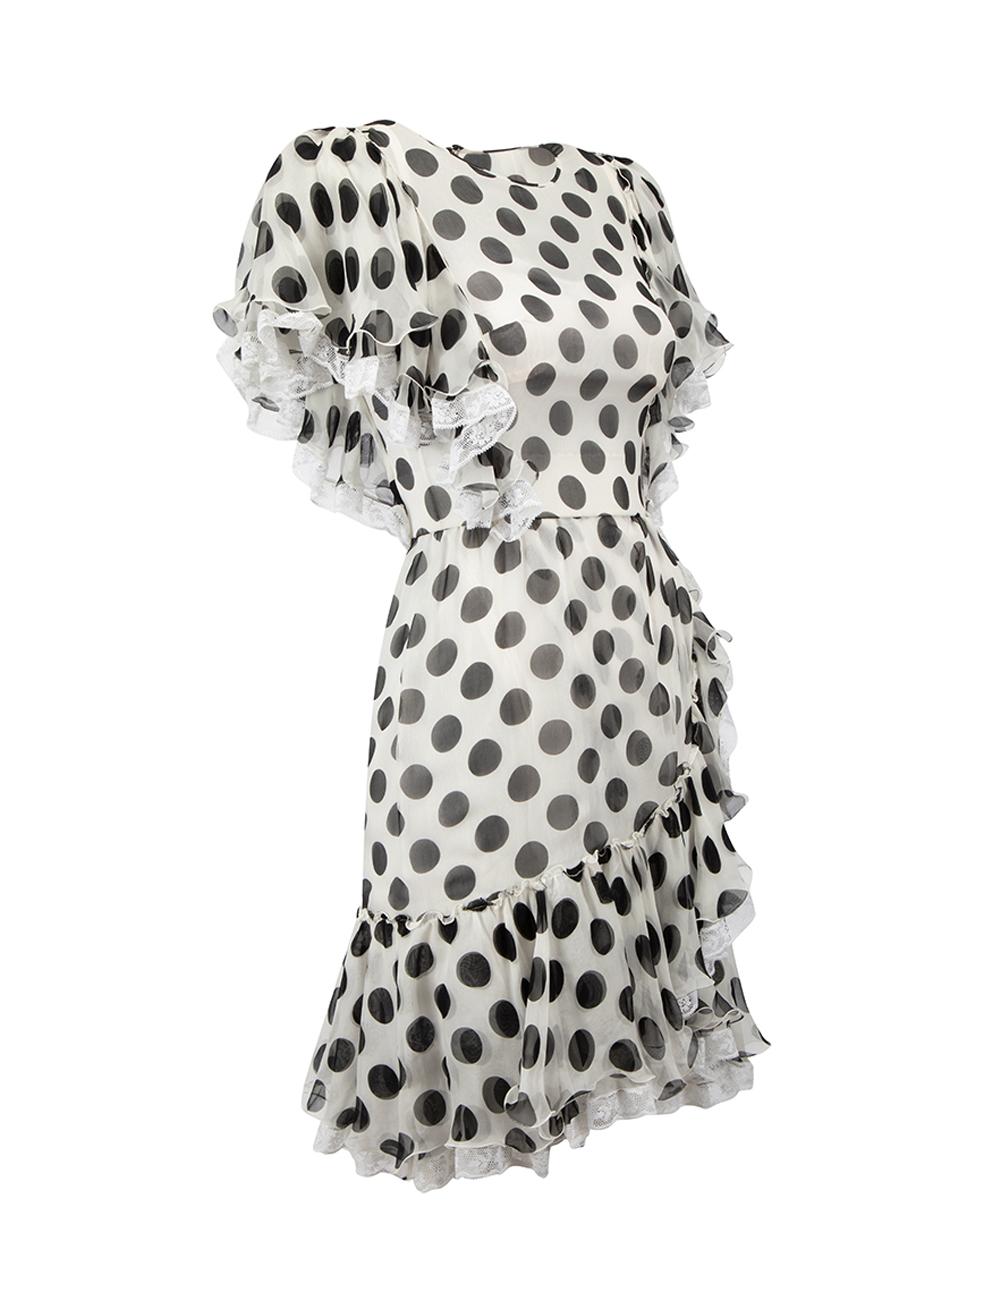 CONDITION is Very good. Minimal wear to dress is evident. Minimal discolouration on tulle of ruffle detail on this used Dolce & Gabbana designer resale item. Slip dress included.



Details


White and black

Silk

Dress

Polkadot pattern

Round